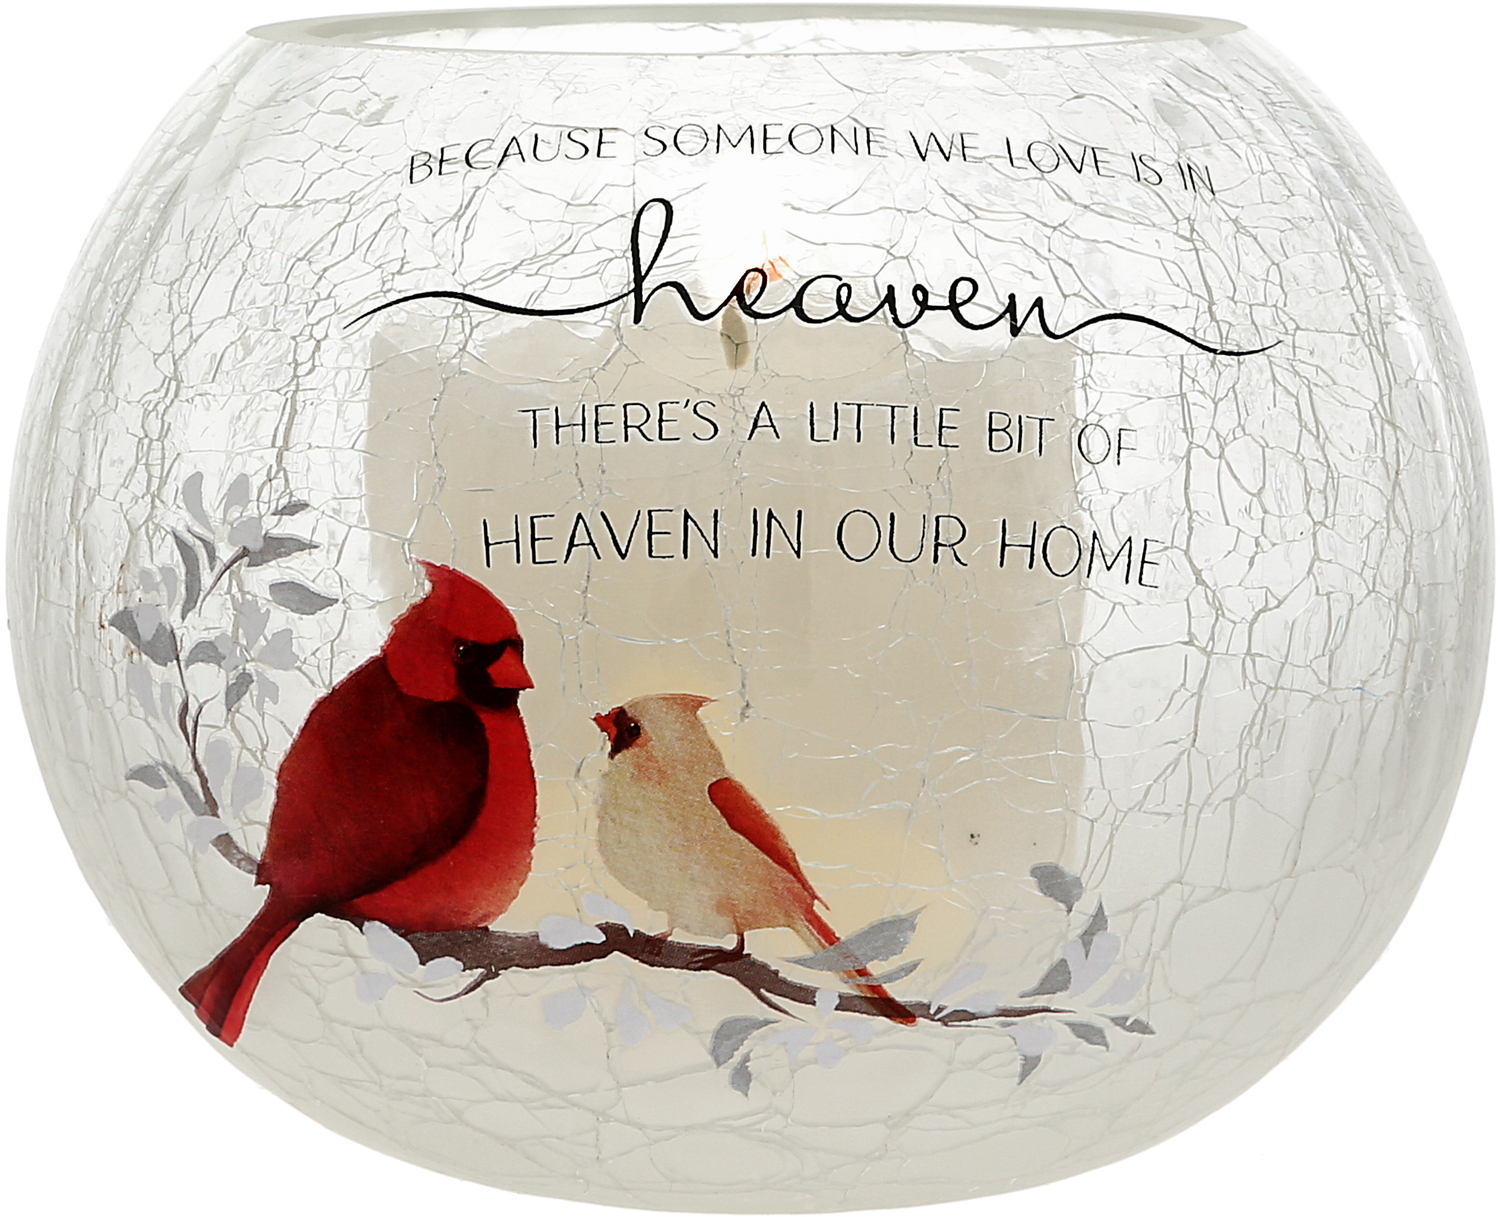 Heaven In Our Home by Always by Your Side - Heaven In Our Home - 5" Round Votive Holder